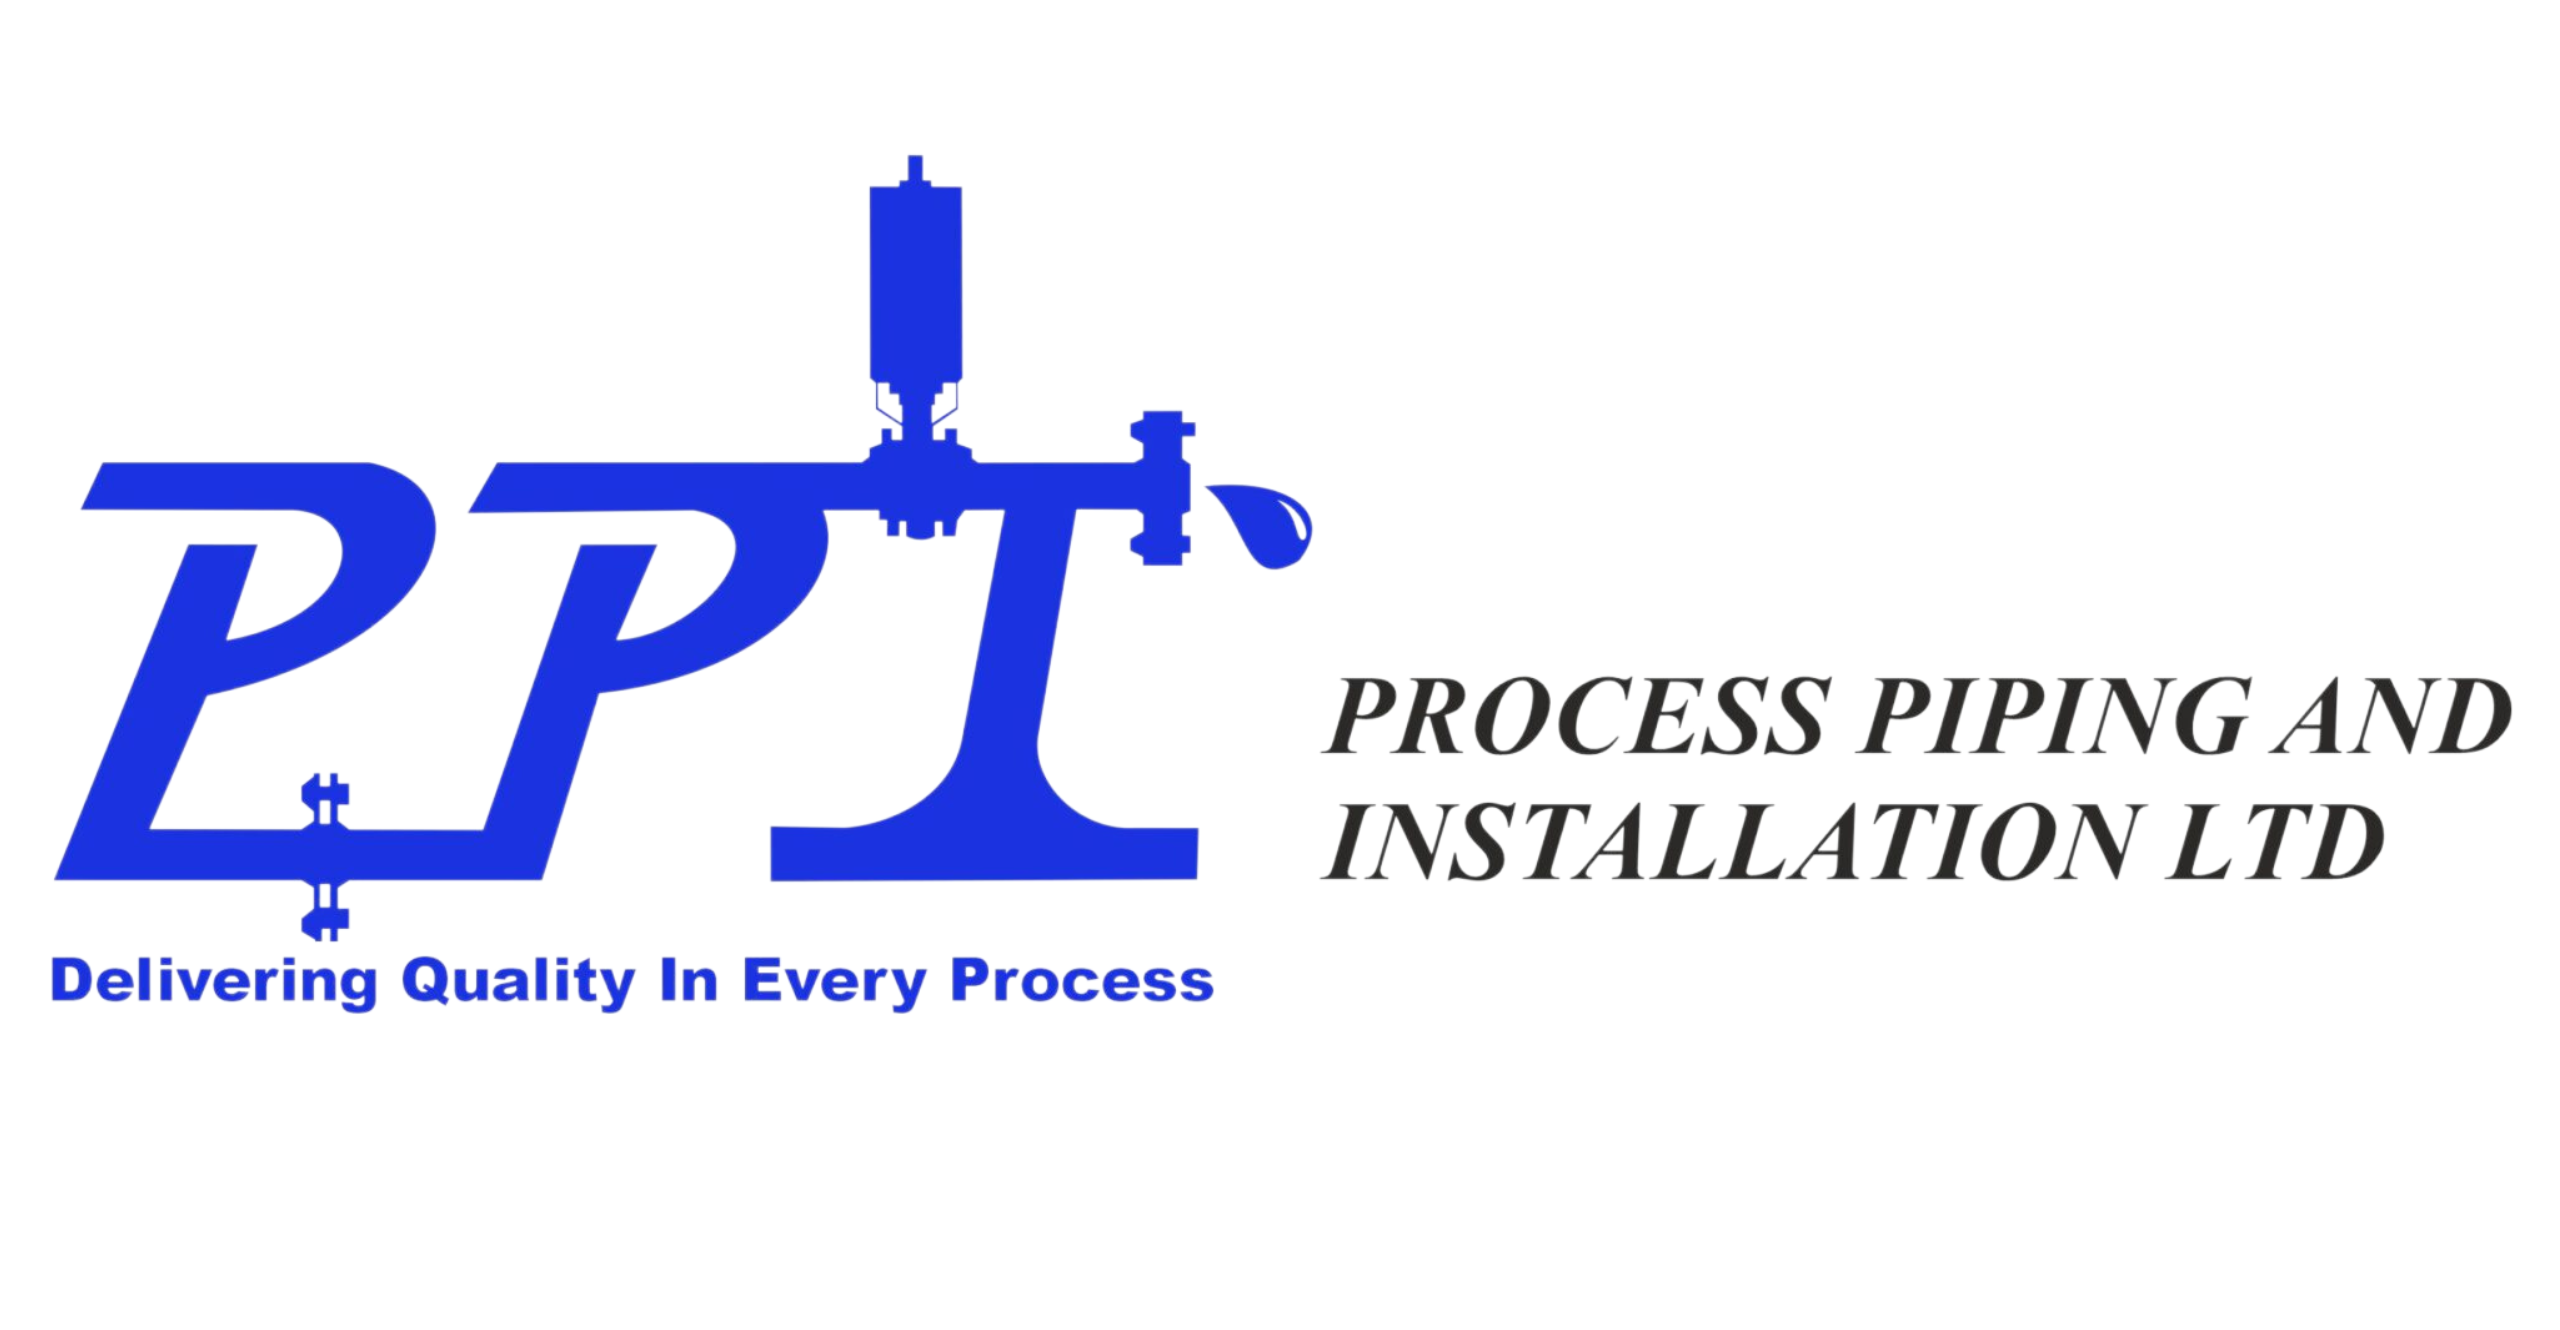 PROCESS PIPING AND INSTALLATION LIMITED